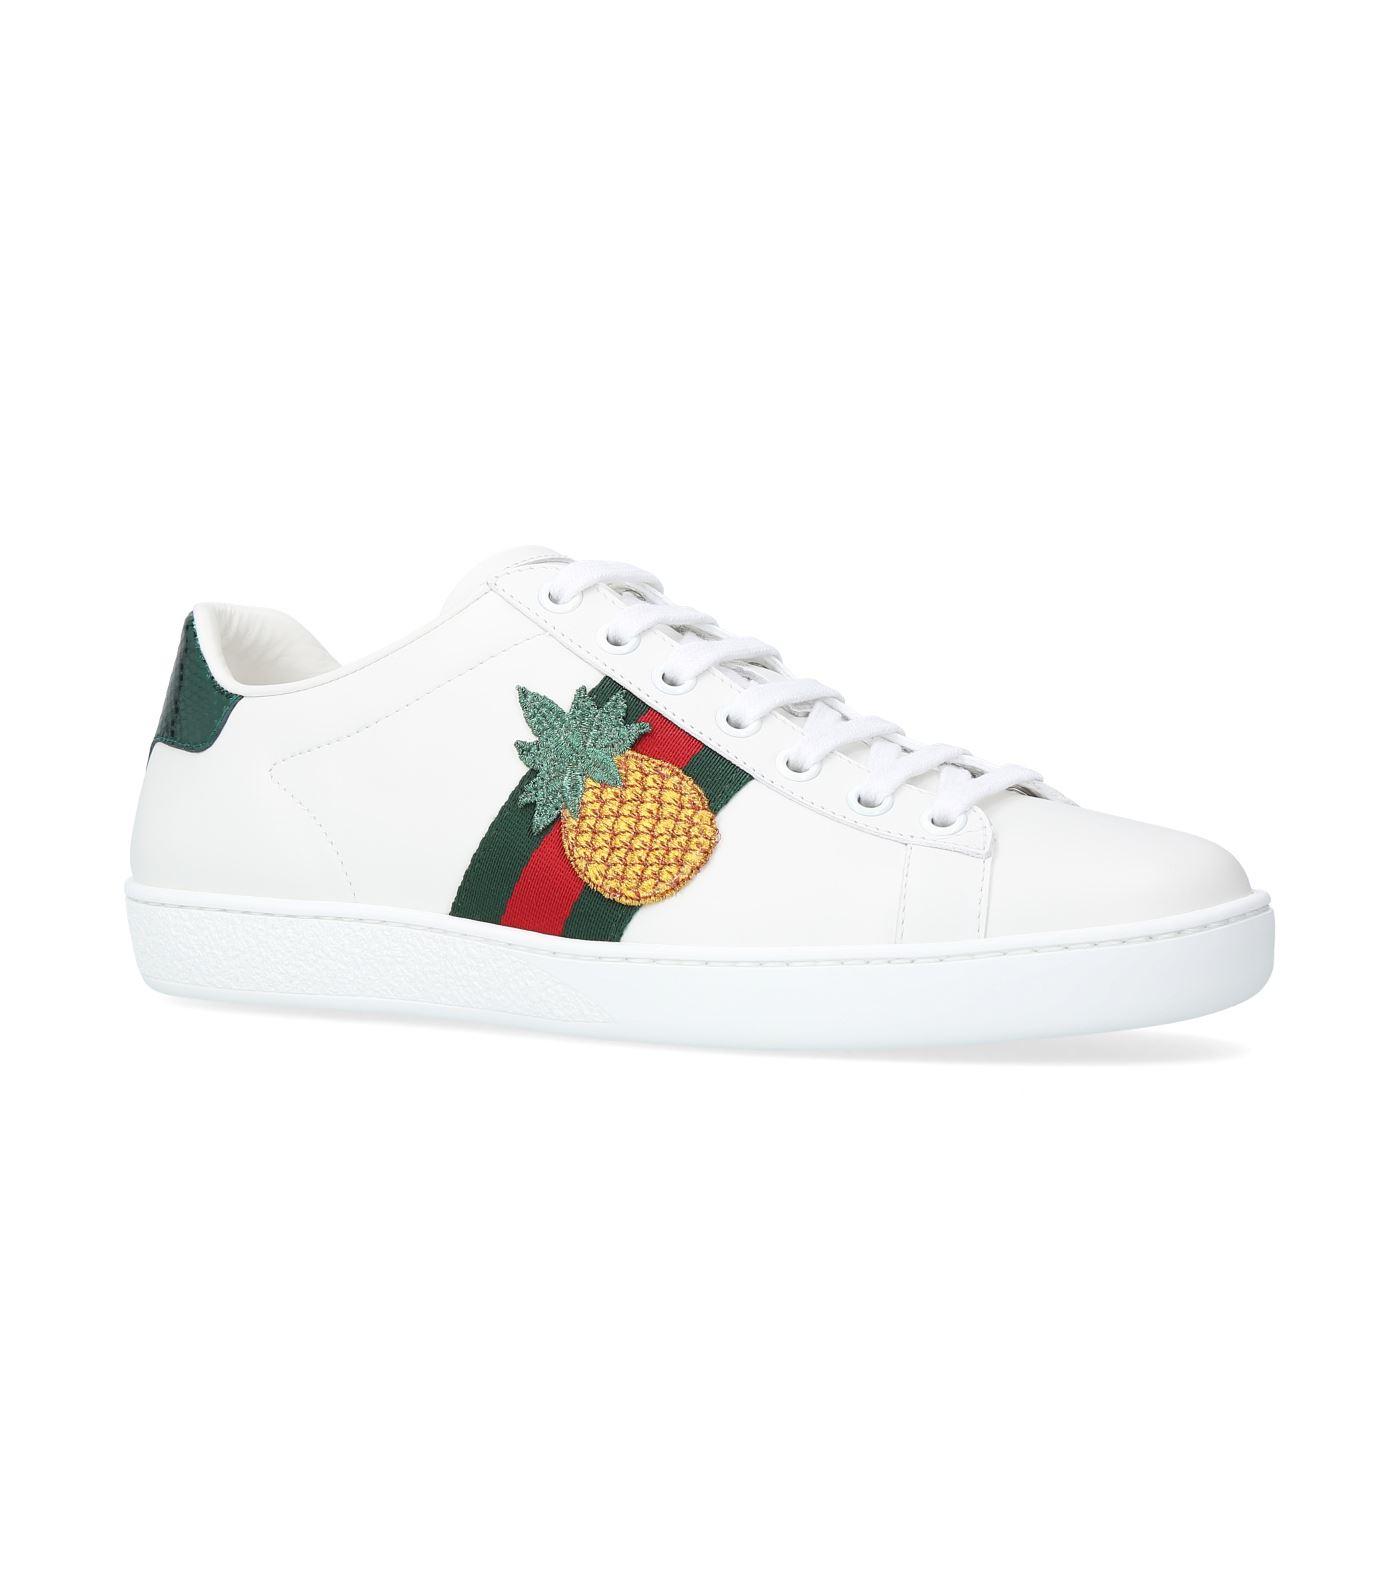 pineapple gucci sneakers Off 62% - www.loverethymno.com